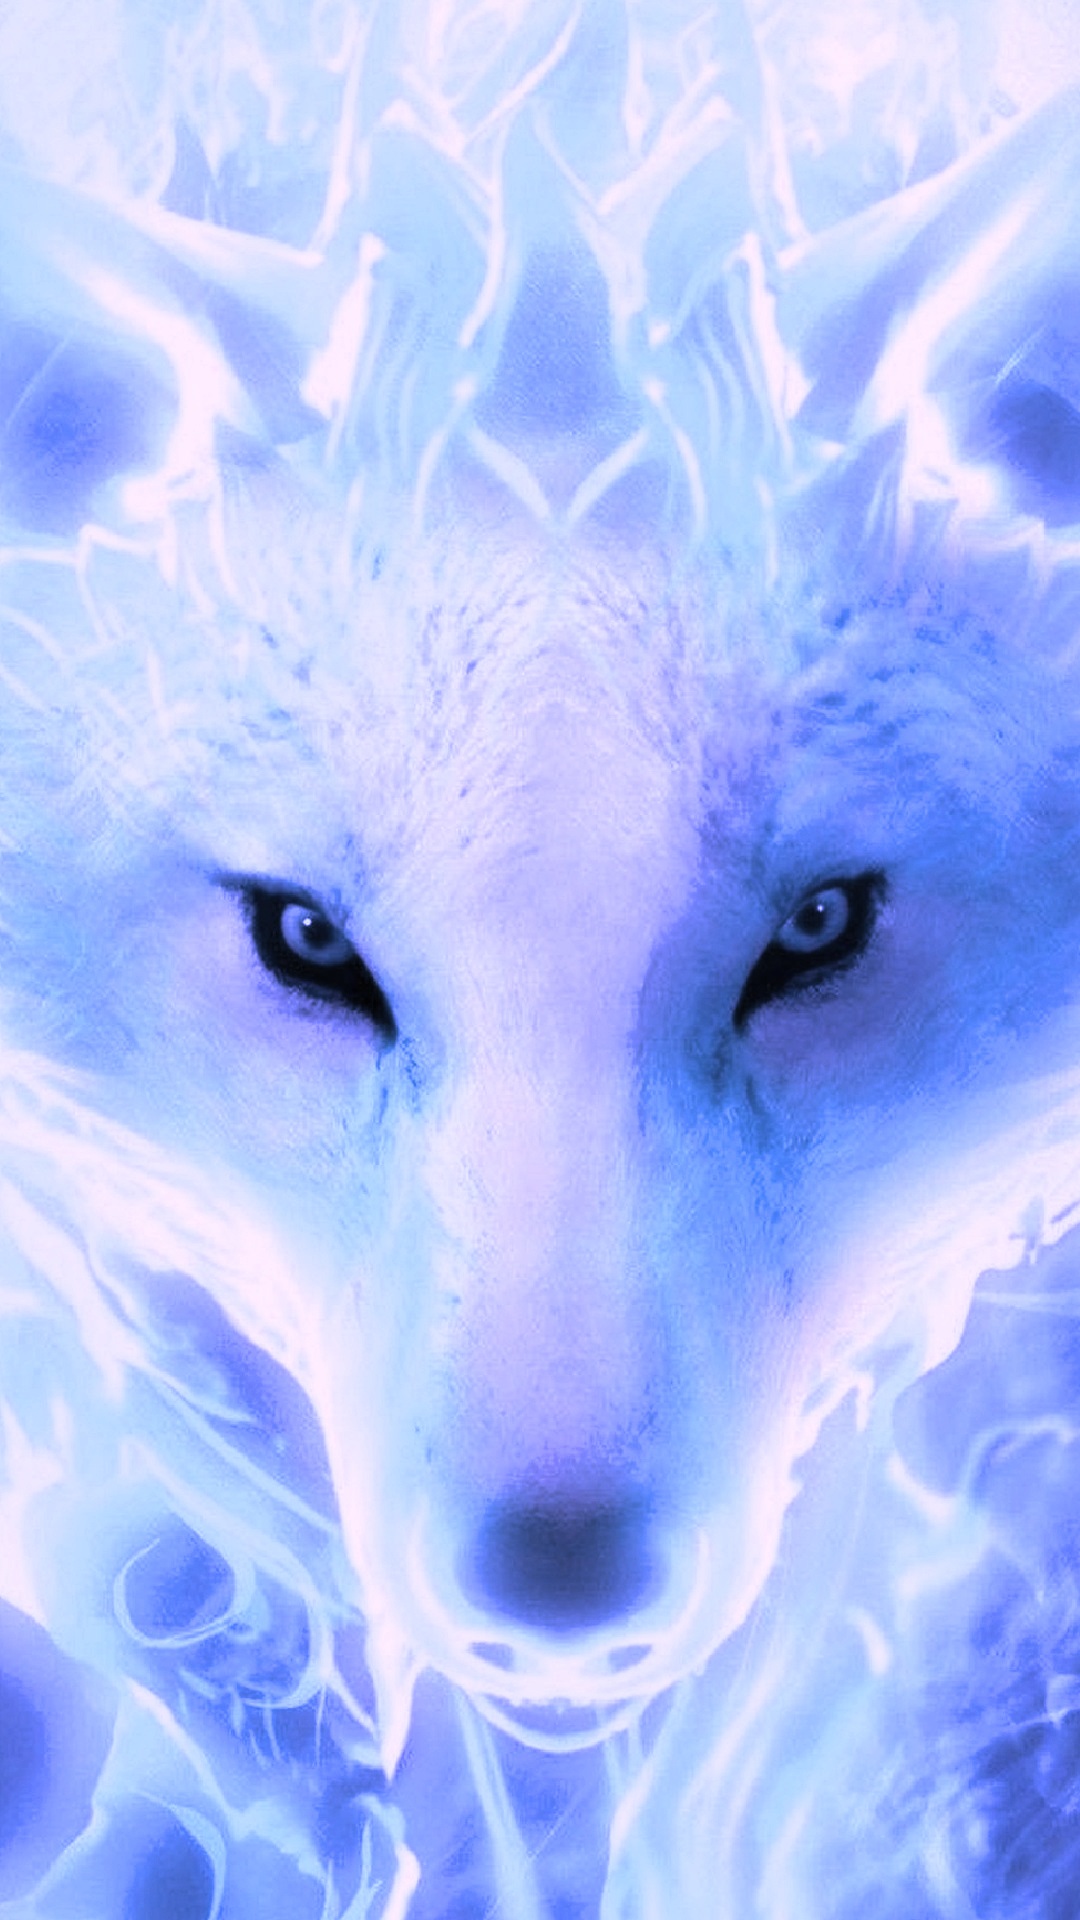 Cool Wolf Backgrounds For Android with high-resolution 1080x1920 pixel. You can use this wallpaper for your Android backgrounds, Tablet, Samsung Screensavers, Mobile Phone Lock Screen and another Smartphones device